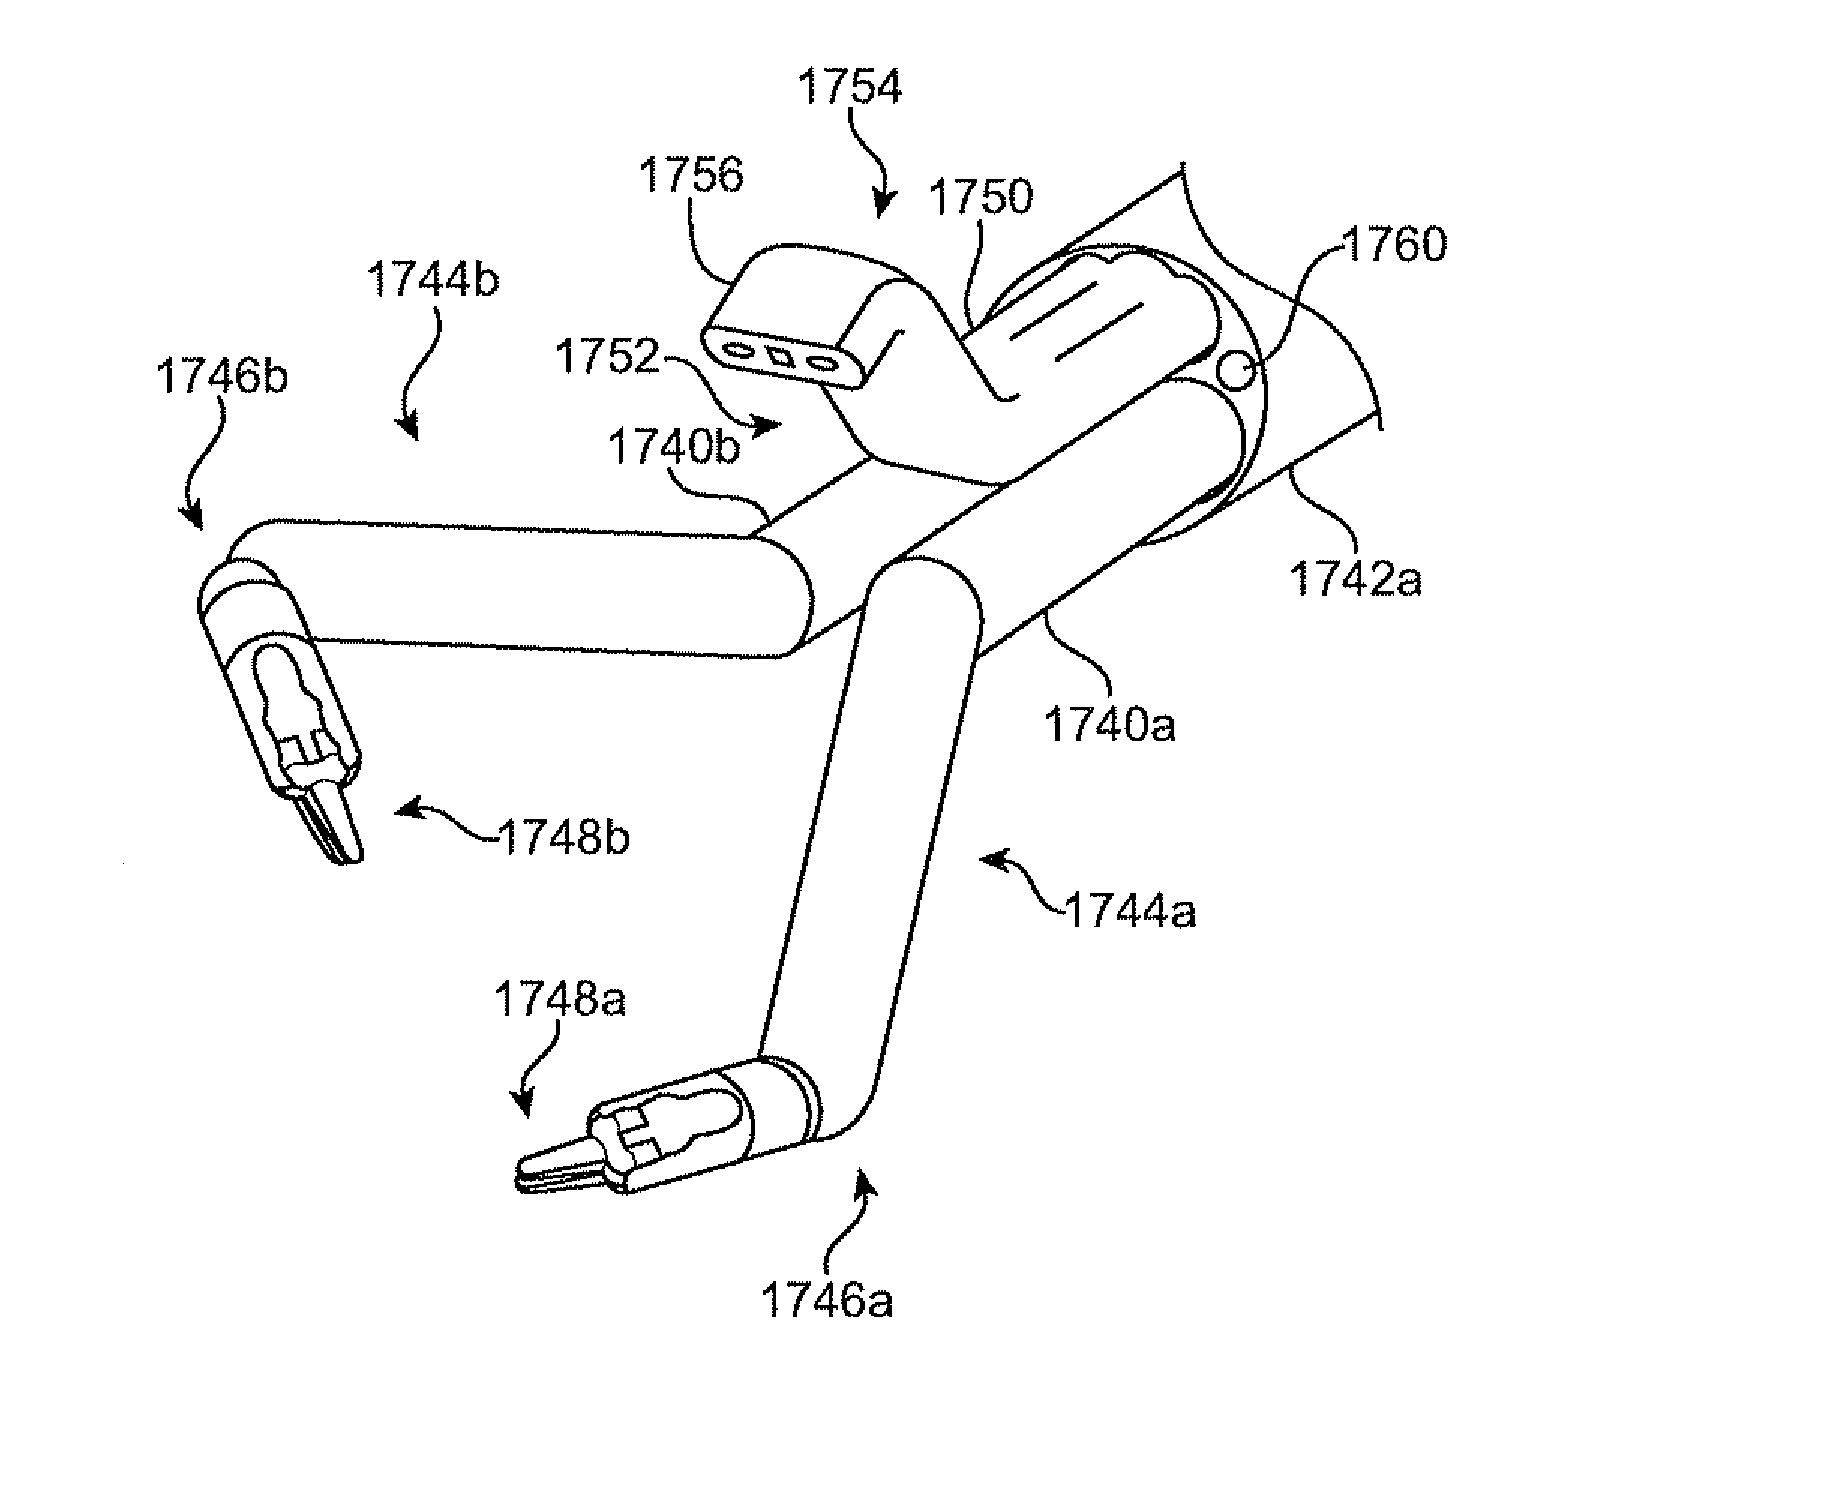 Minimally invasive surgery instrument assembly with reduced cross section